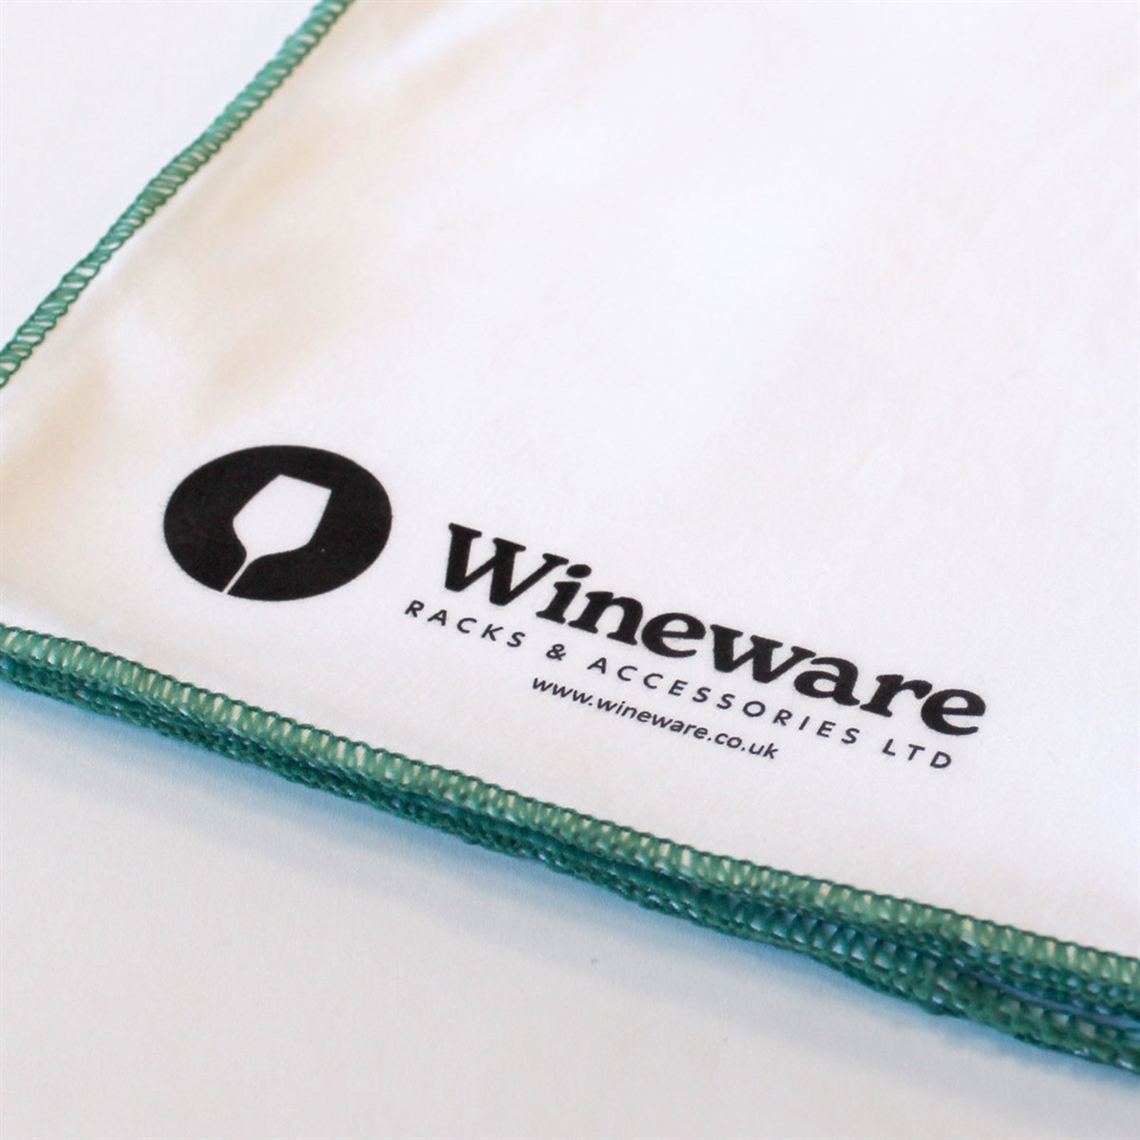 View more grassl glass from our Wine Glass Cleaning & Accessories range